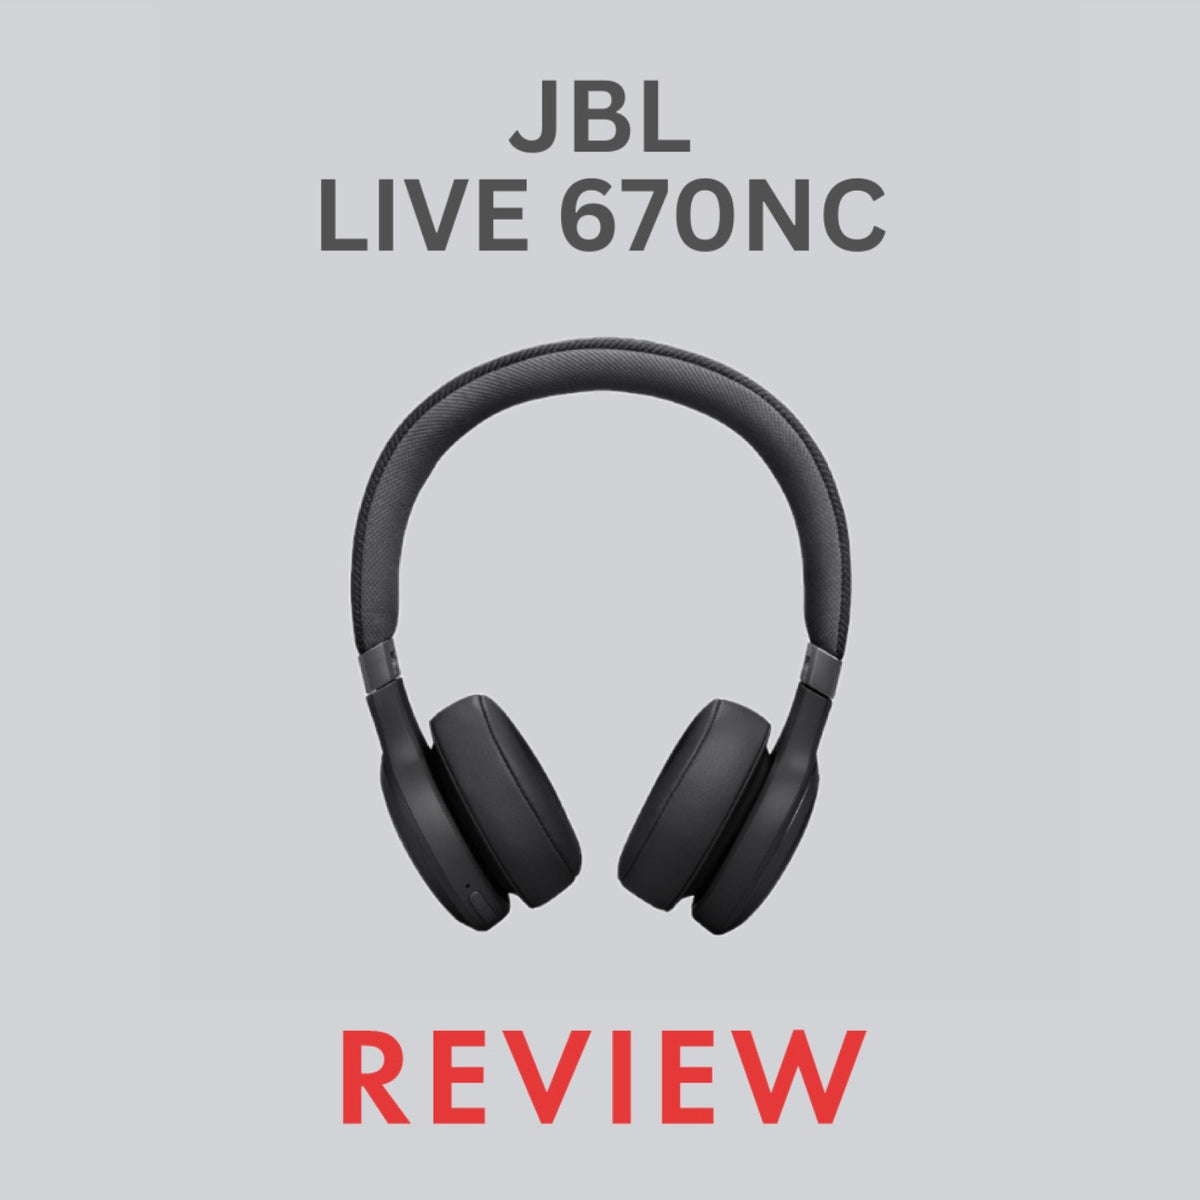 JBL Tune 670NC review: lightweight in both build and sound quality